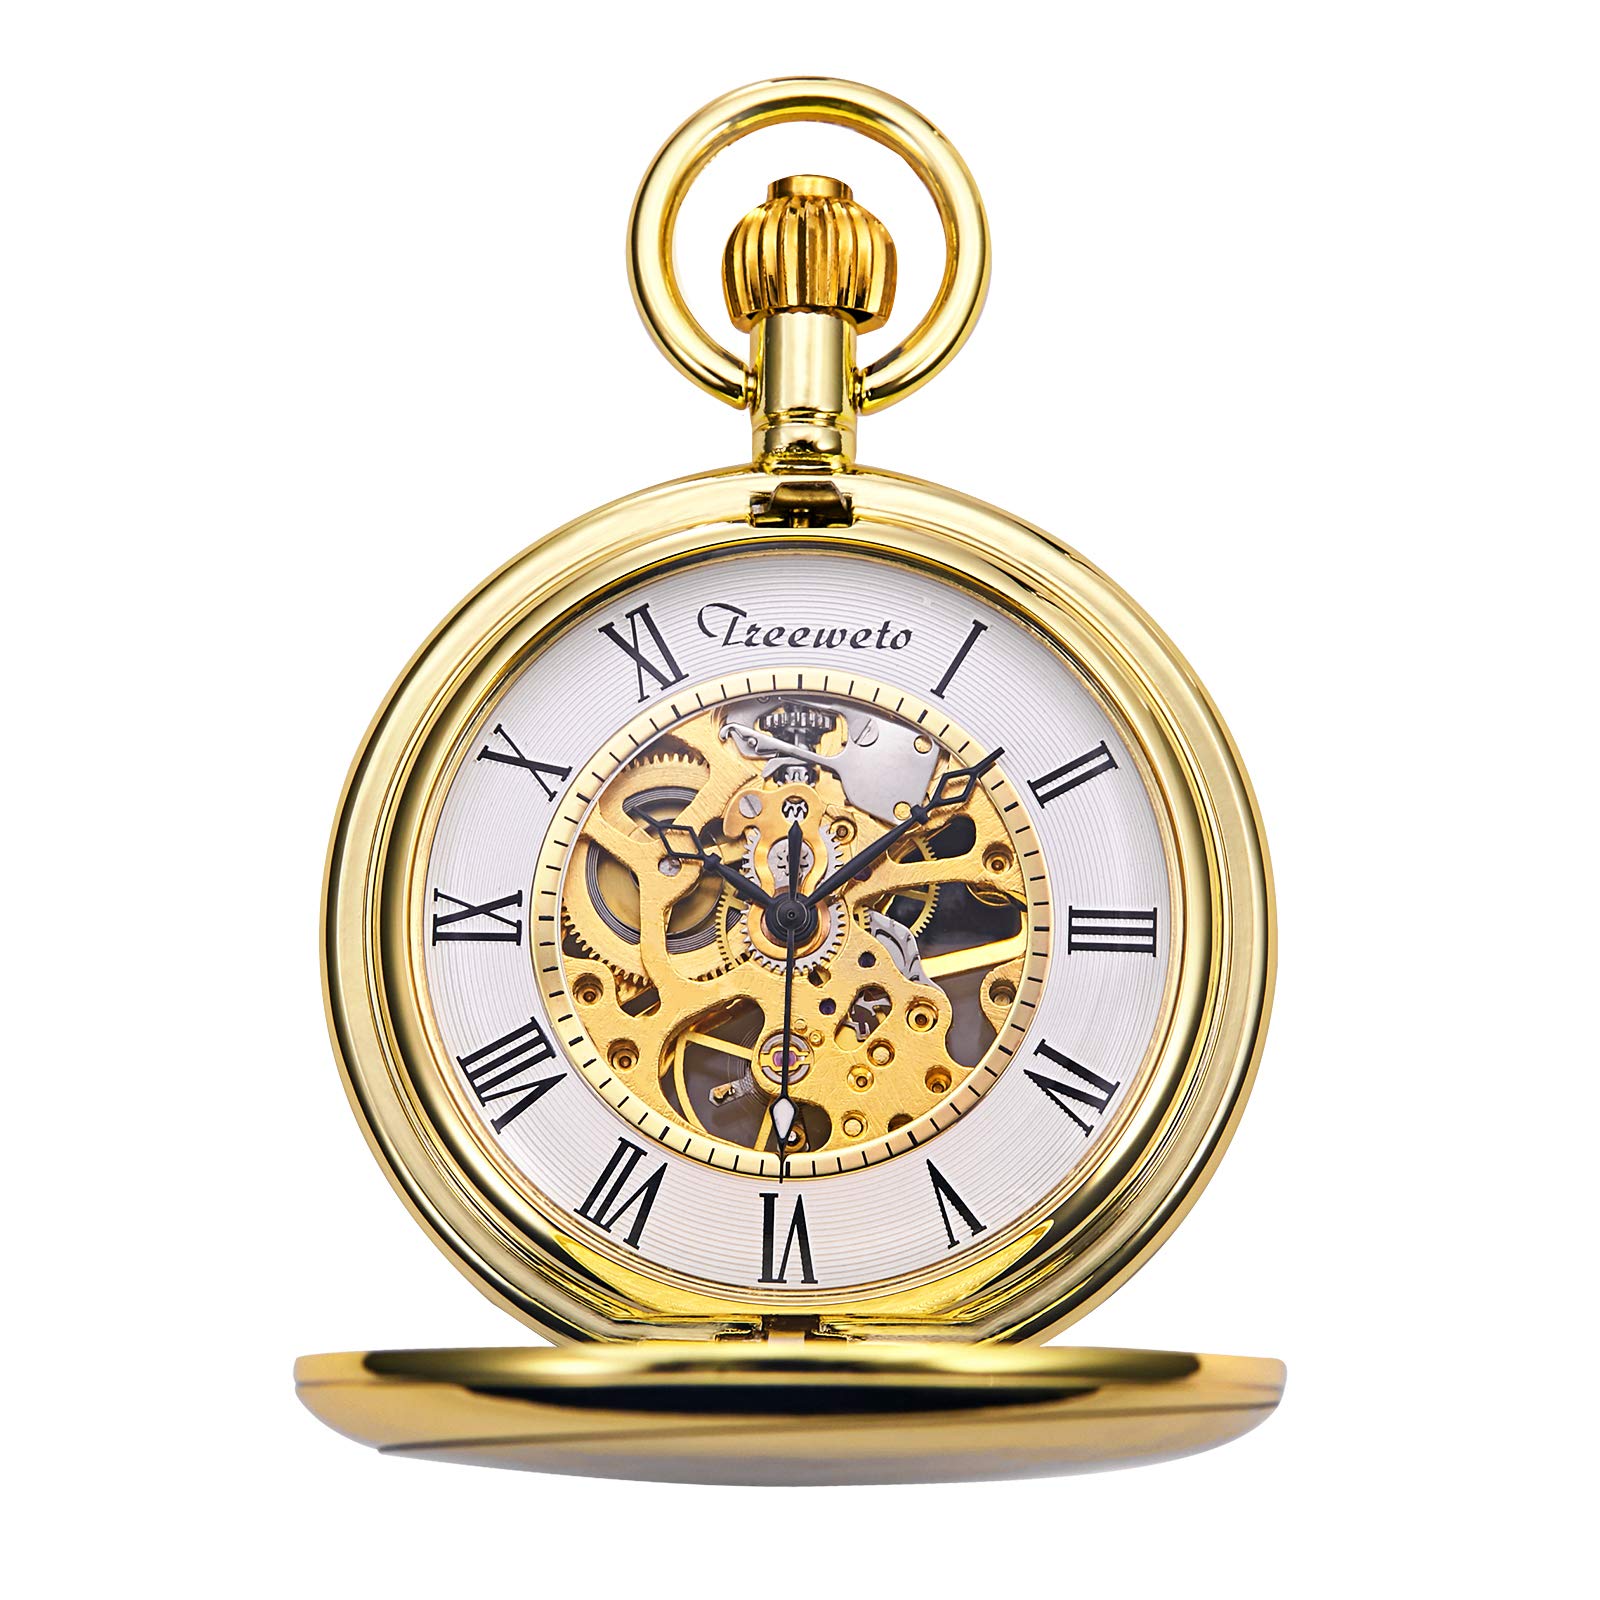 TREEWETO Pocket Watch Gold Smooth Case Skeleton Dial Mechanical Movement with Chain + Box